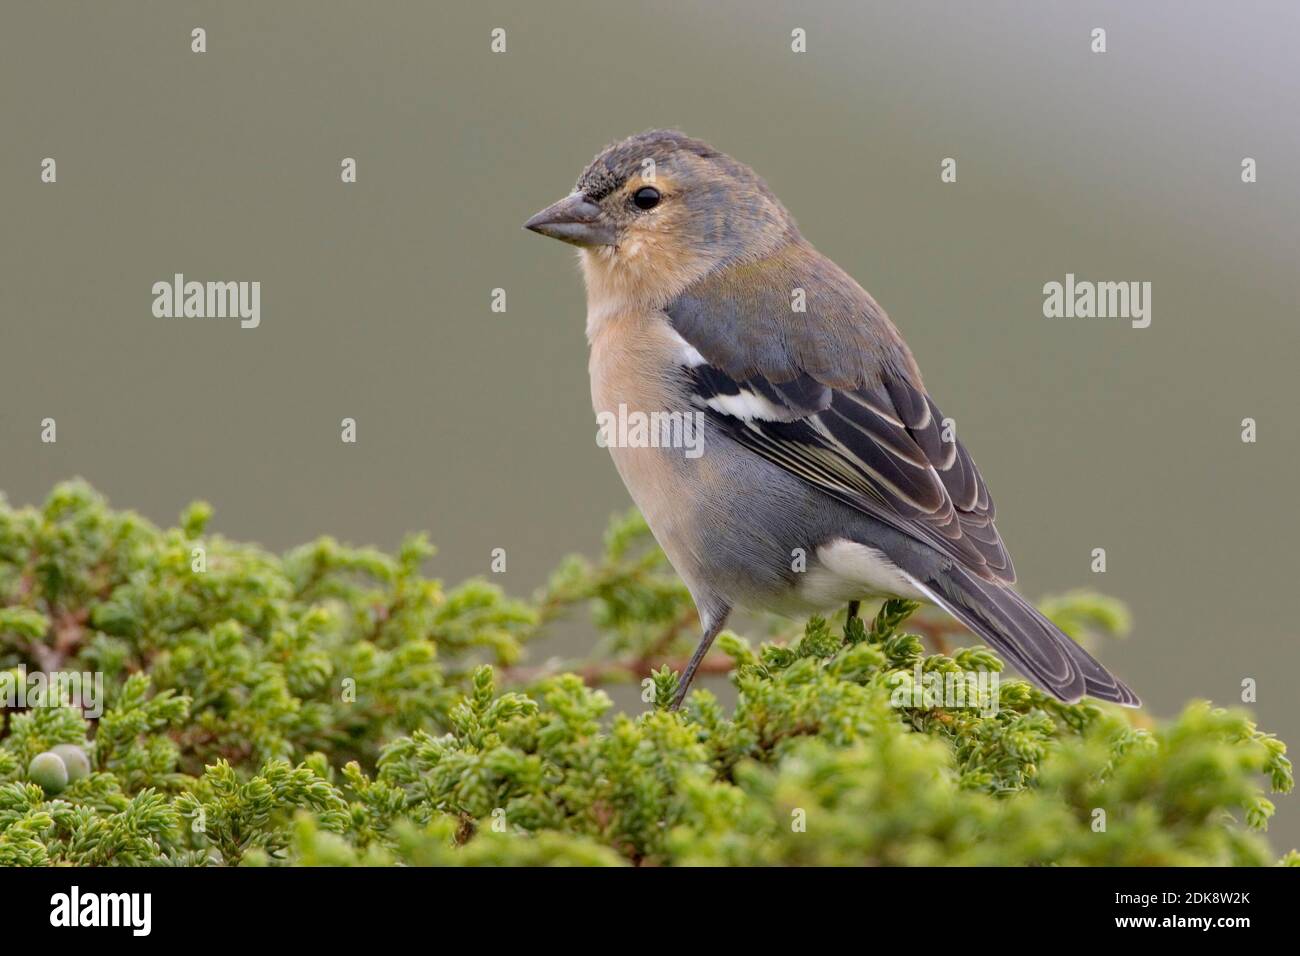 Mannetje Azorenvink; Male Azores Chaffinch Stock Photo - Alamy